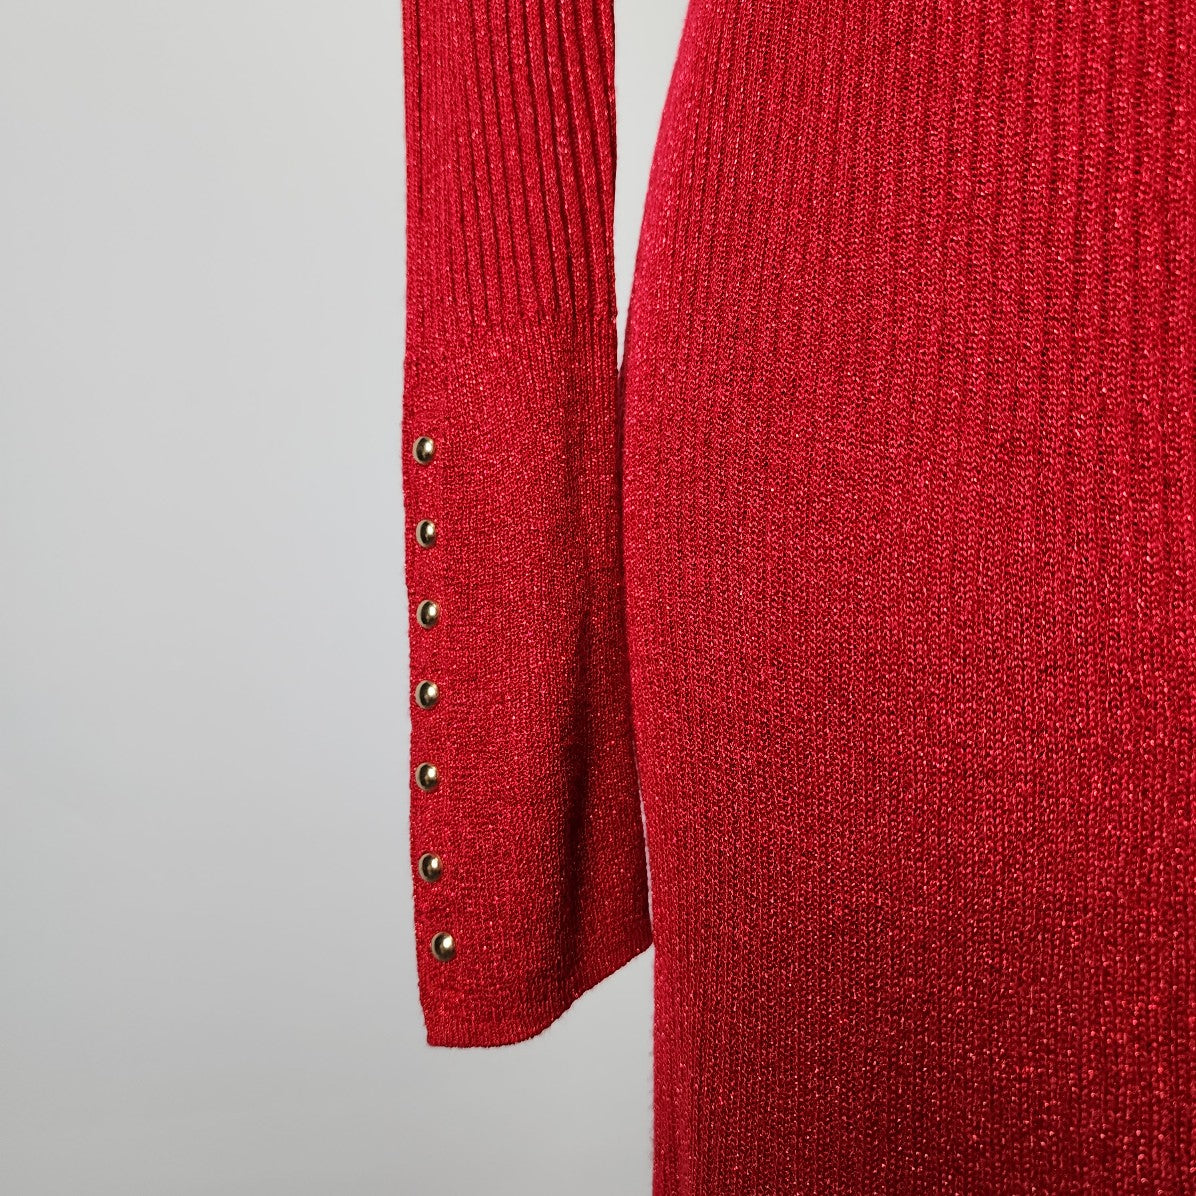 Nygard Sparkle Red Knit Long Cardigan Size M